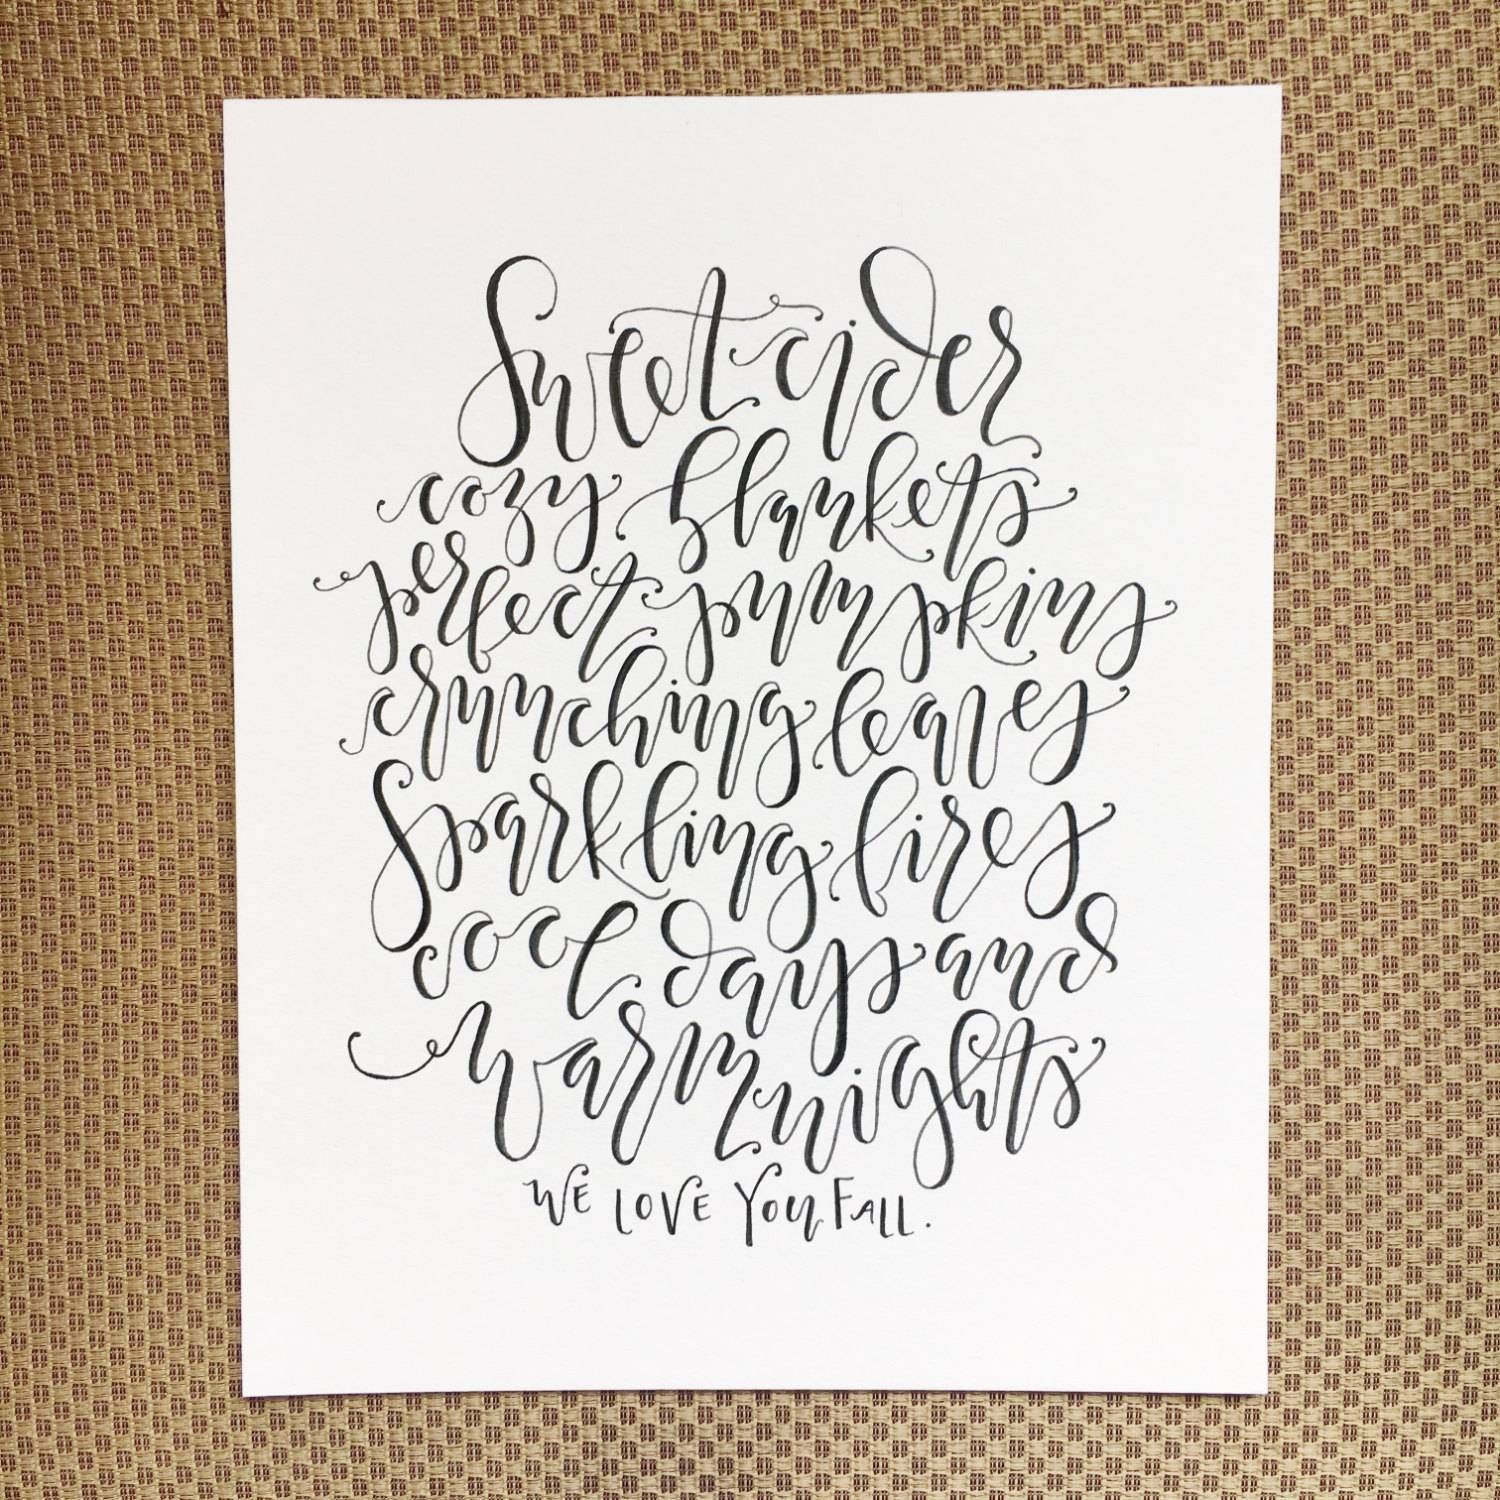 We Love You Fall Calligraphy Print, Handlettered Seasonal Home Intended For Latest Seasonal Wall Art (View 15 of 20)